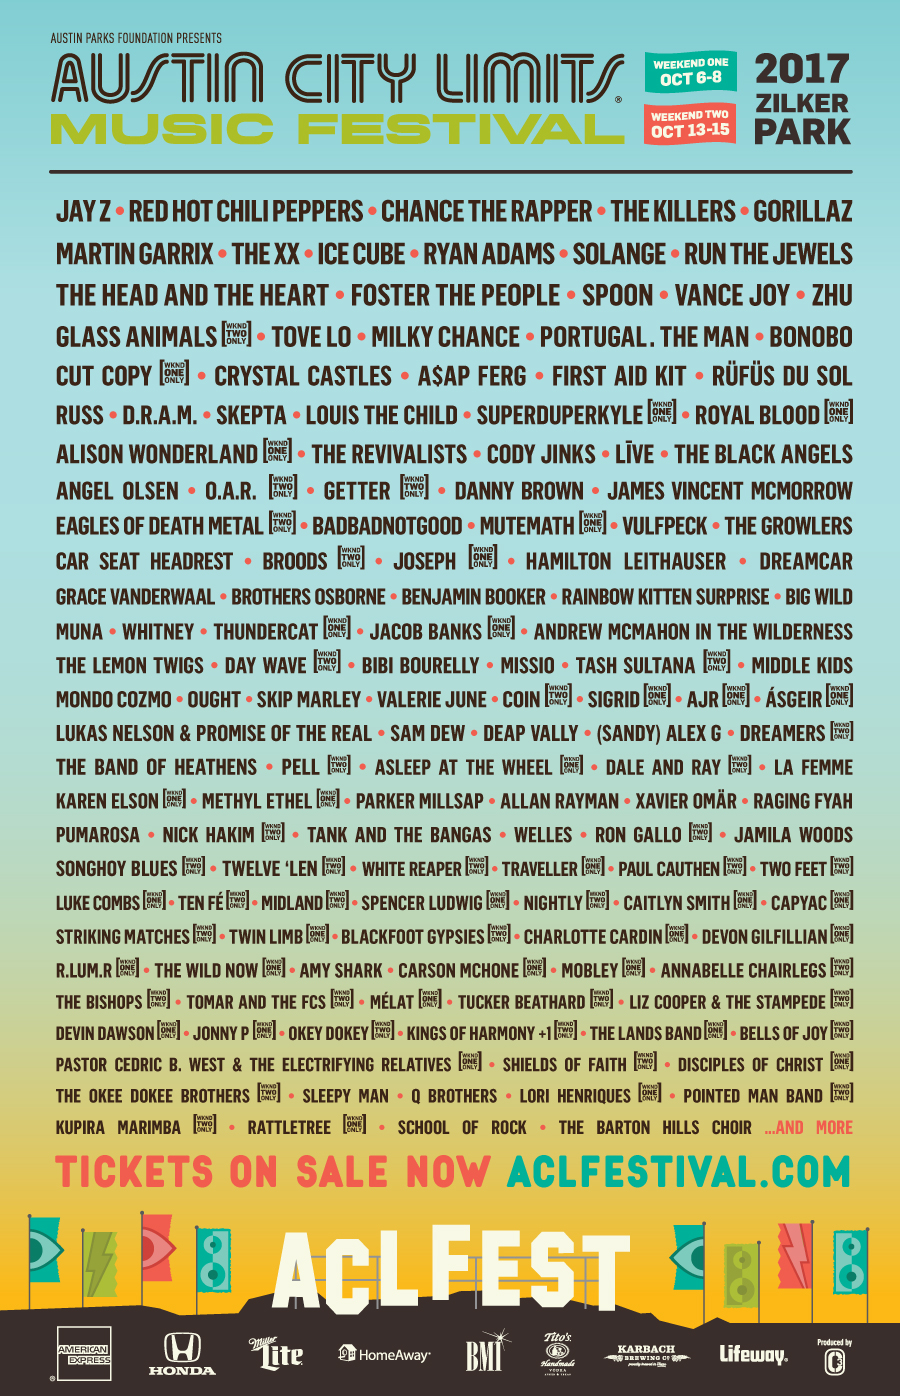 Austin City Limits 2017: Jay Z, Gorillaz, Chance the Rapper, the Killers, Red Hot Chili Peppers, Ryan Adams & More [UPDATE]